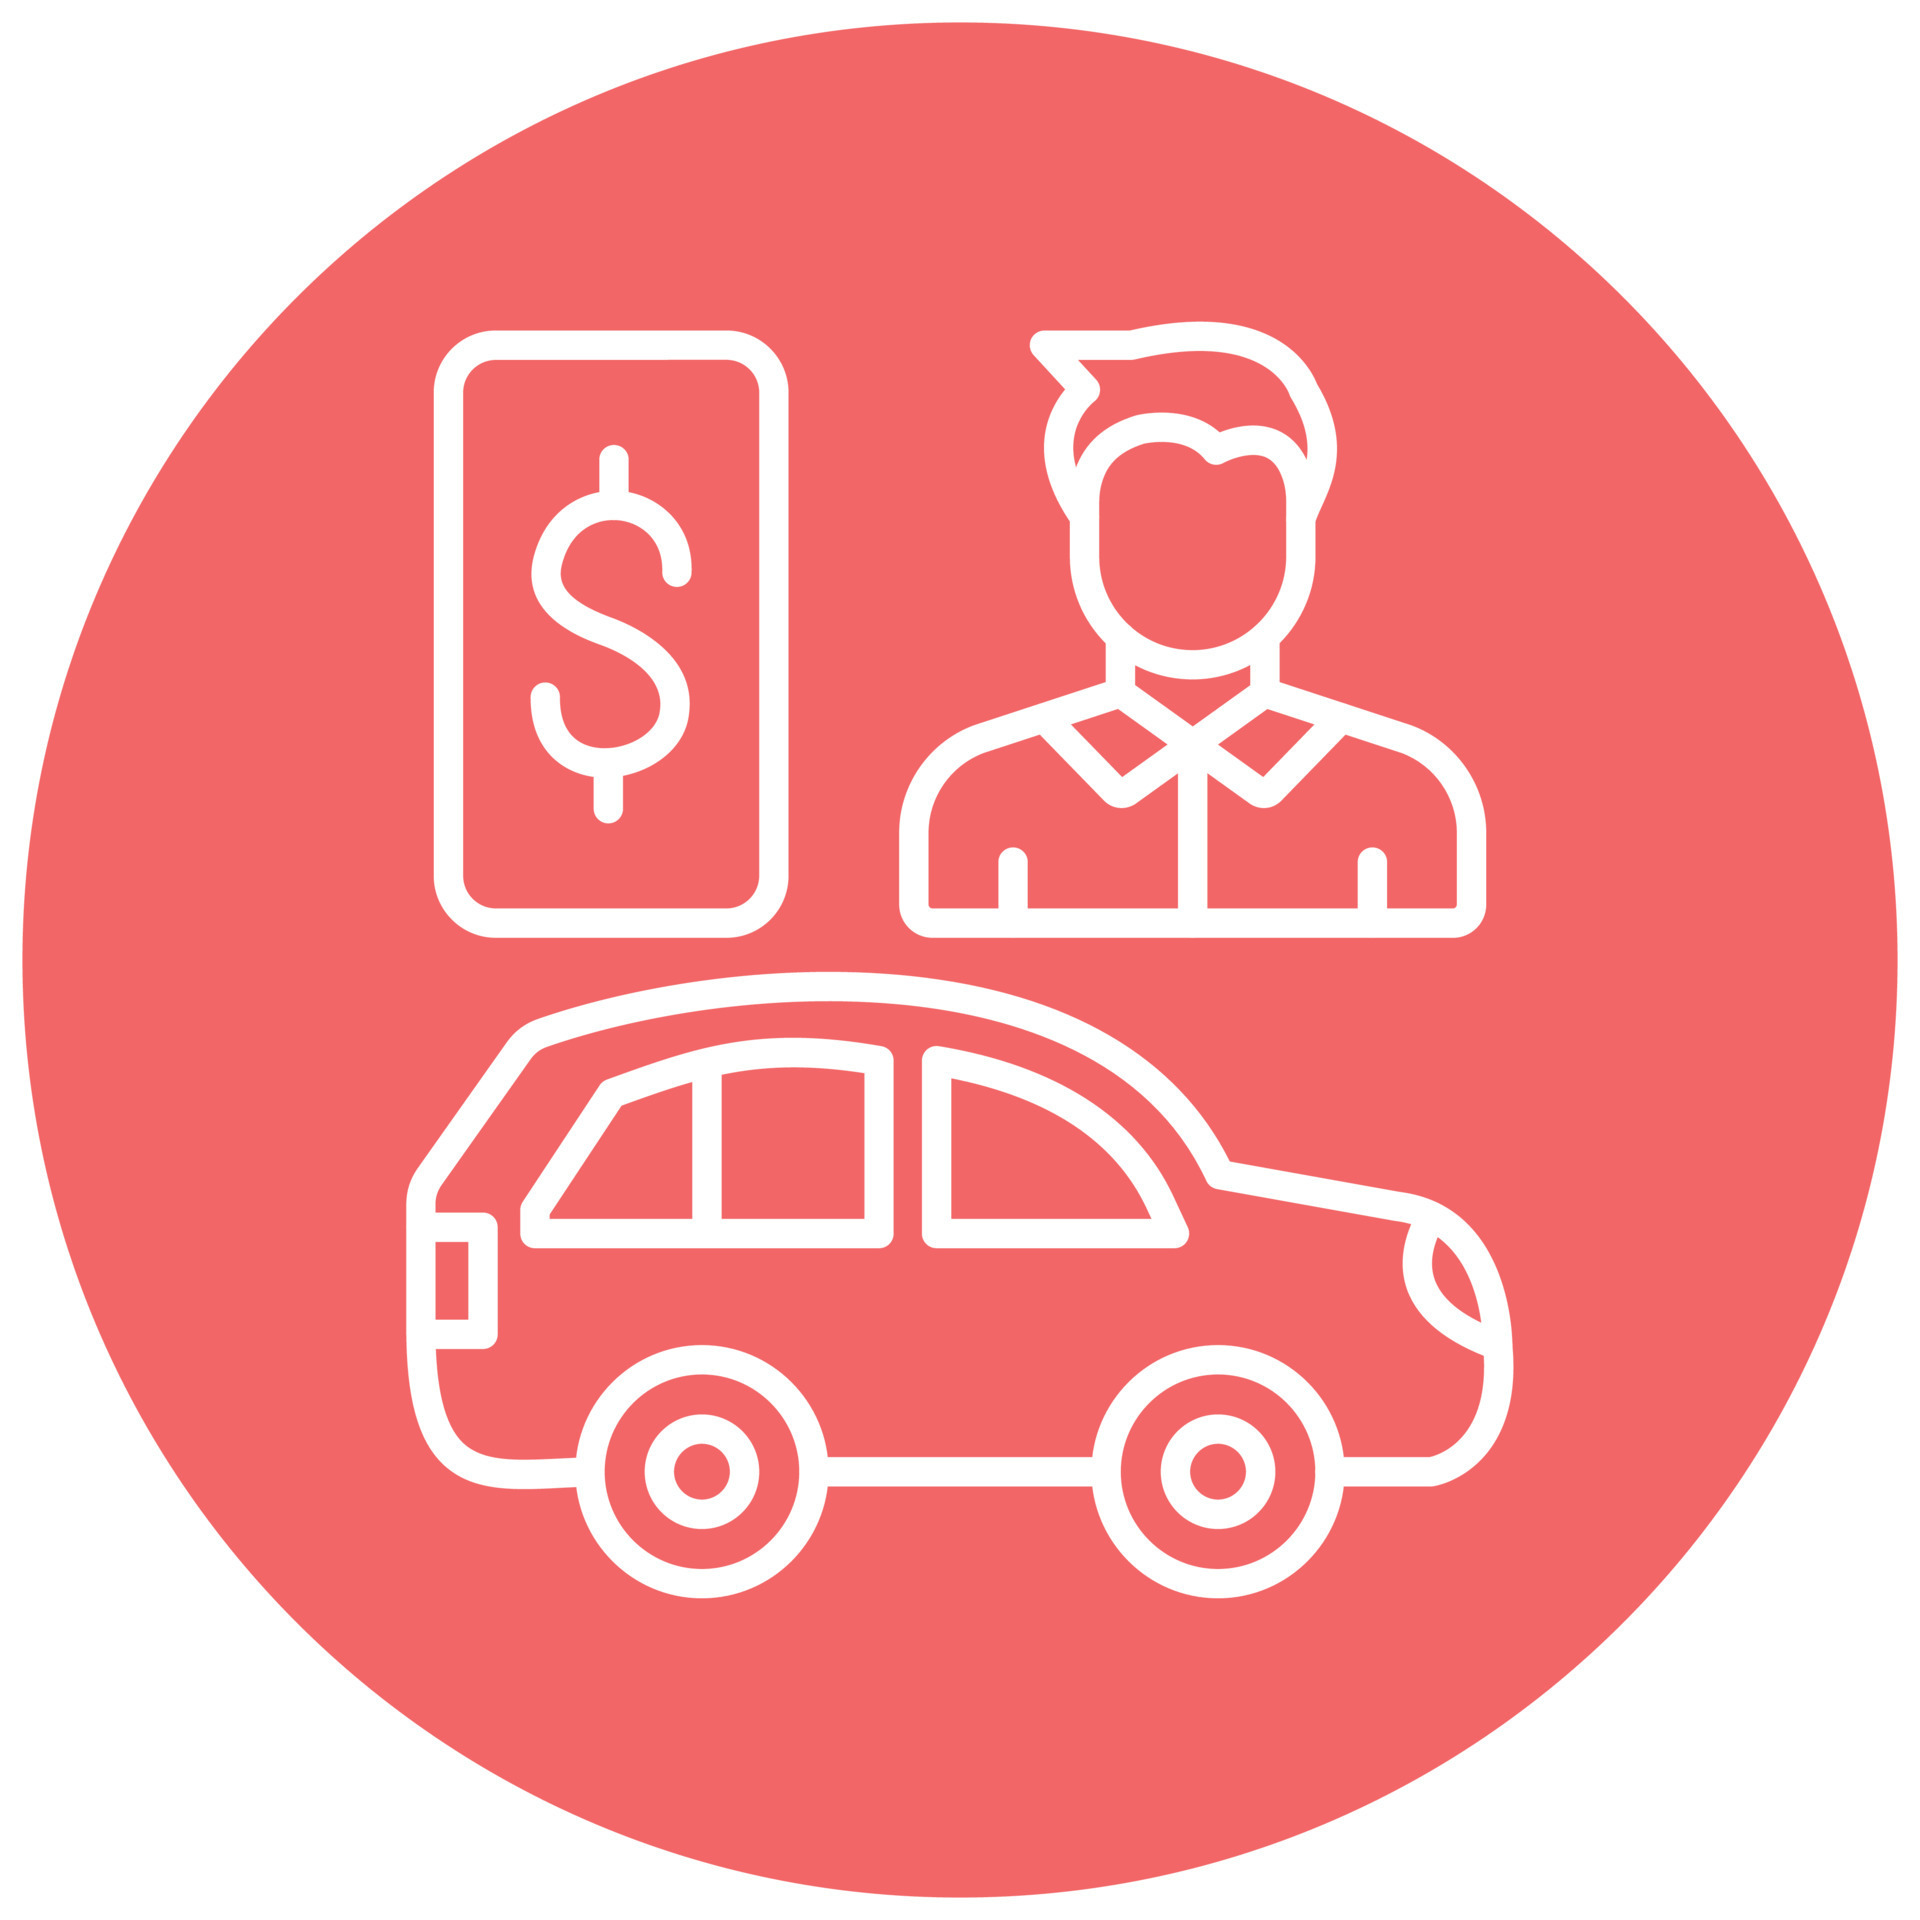 dealer-incentives-icon-style-9484653-vector-art-at-vecteezy